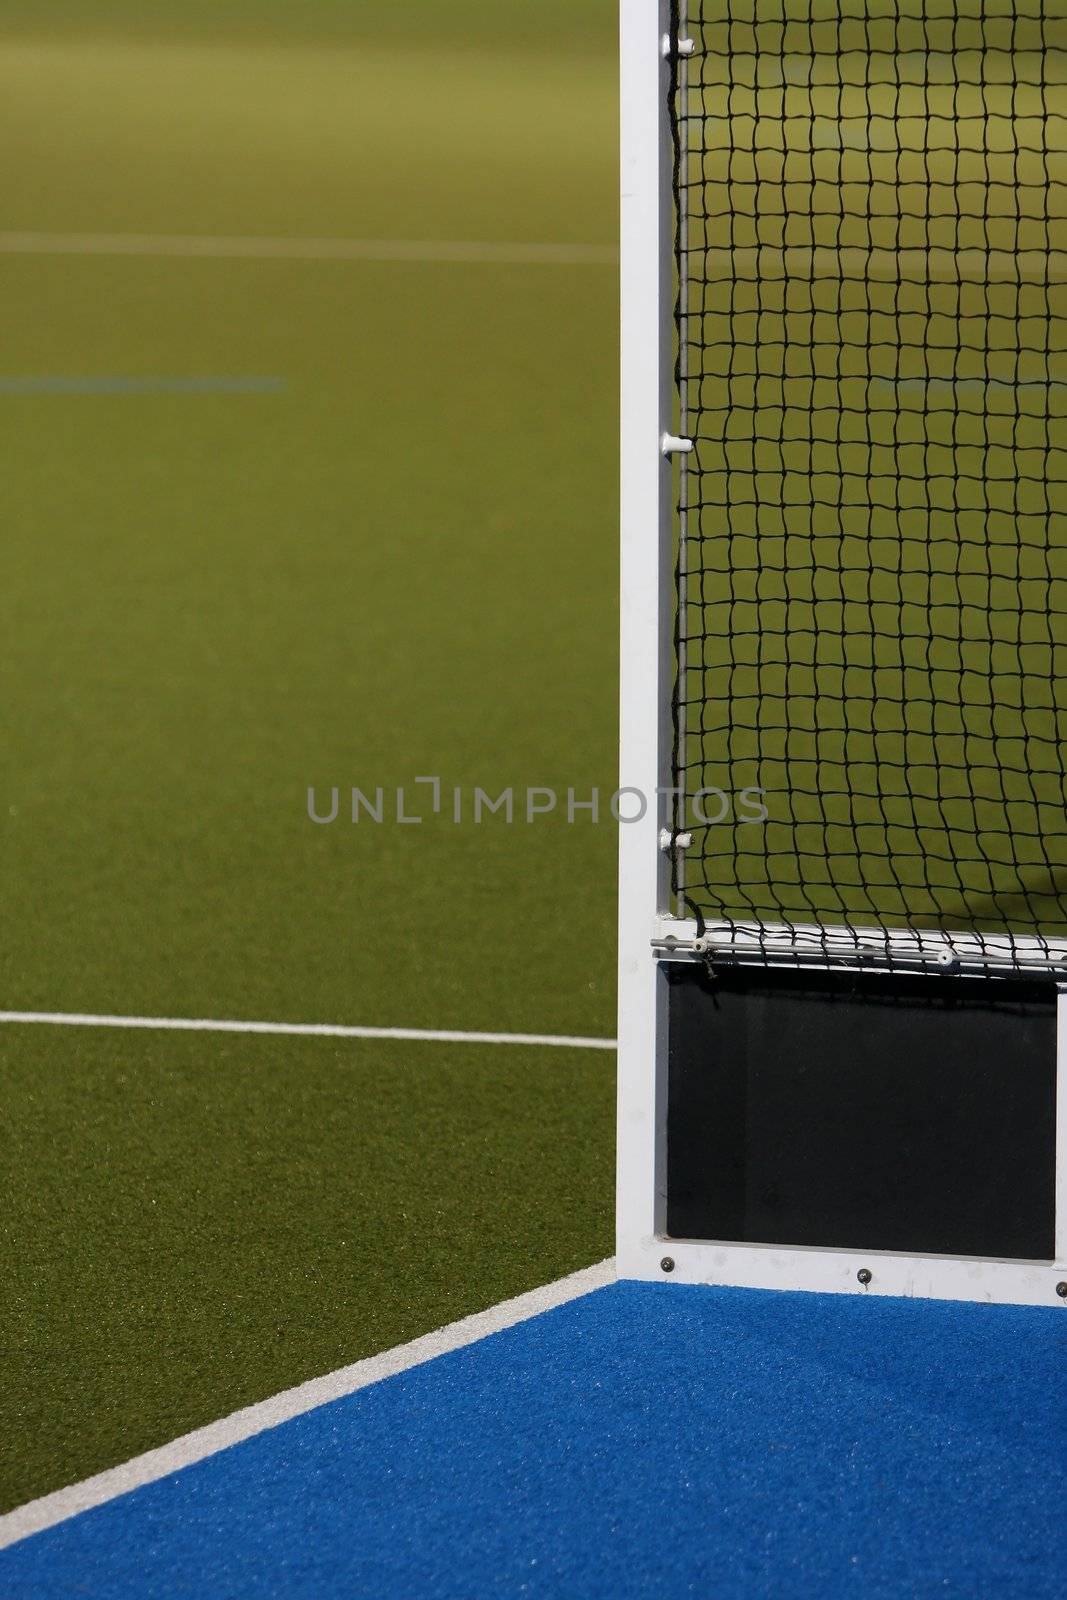 Abstract view of hockey goals on an Astroturf playing field